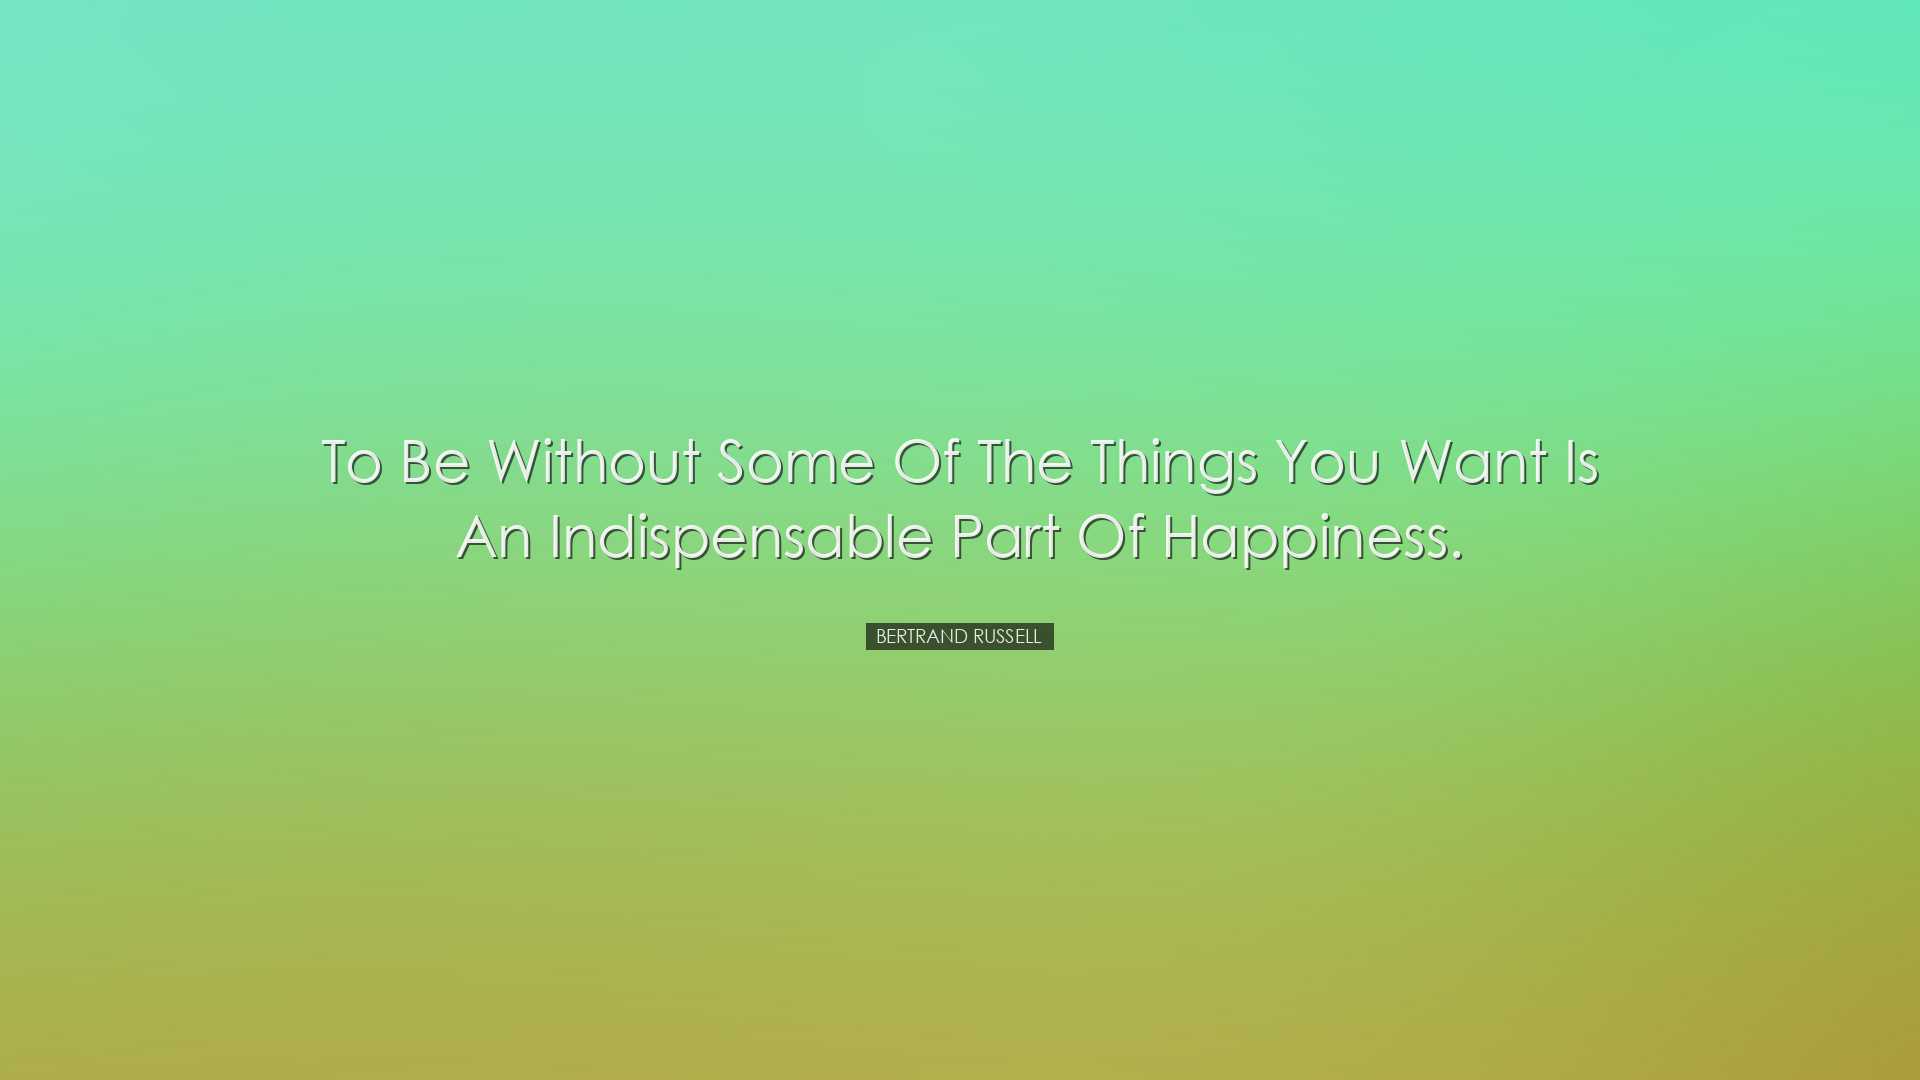 To be without some of the things you want is an indispensable part